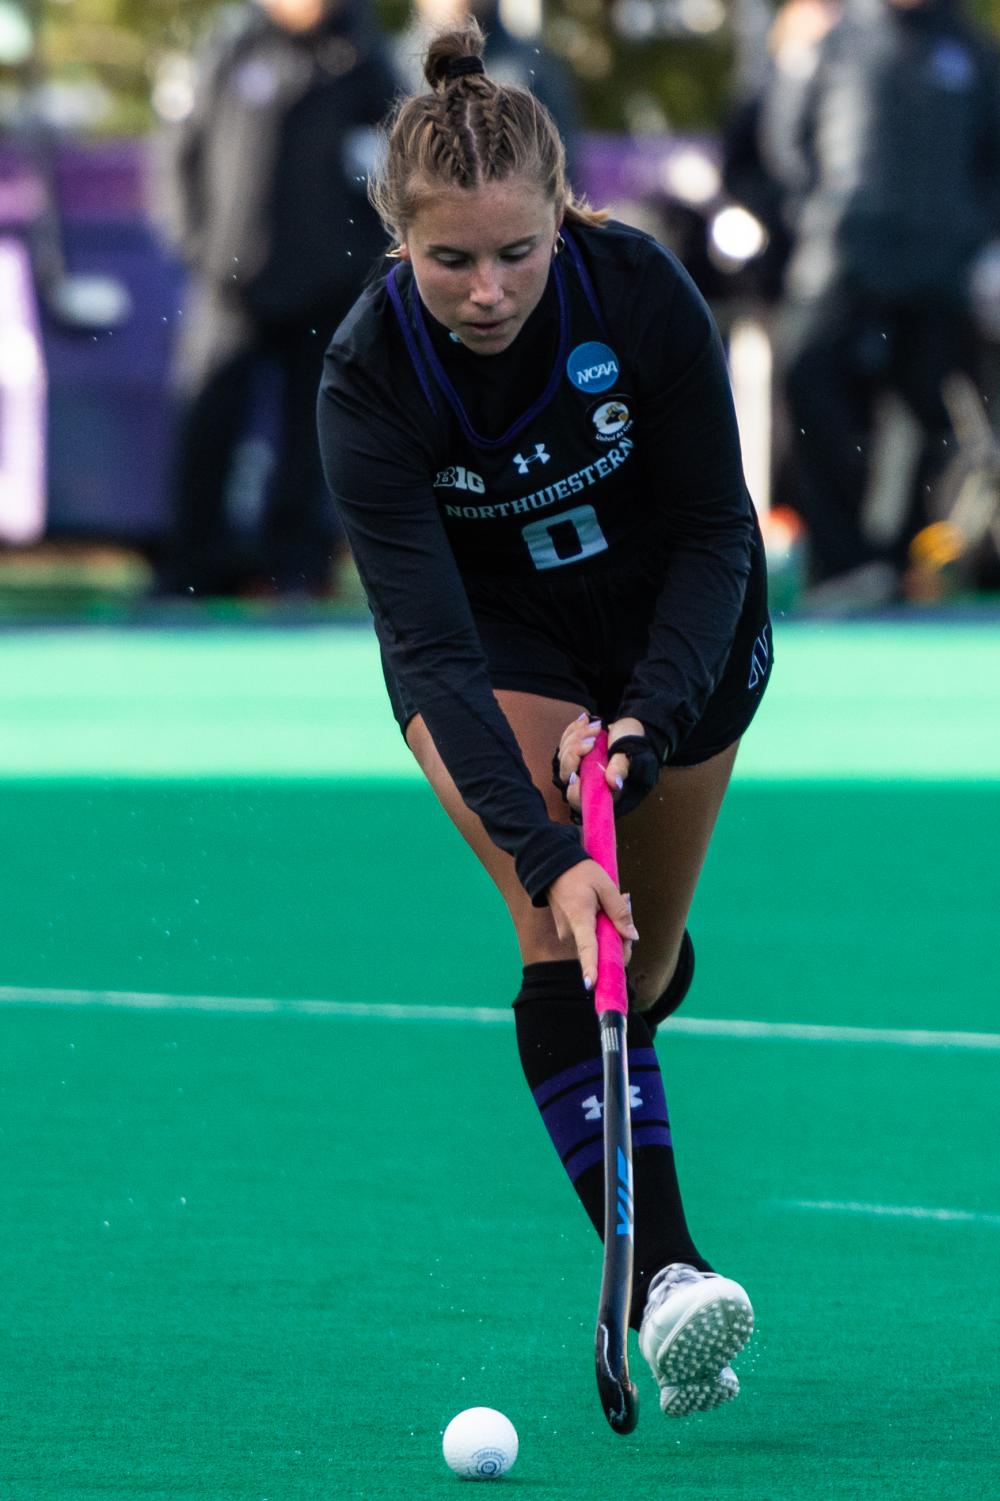 An athlete in a black jersey holds a field hockey stick forward while tracking a white ball.